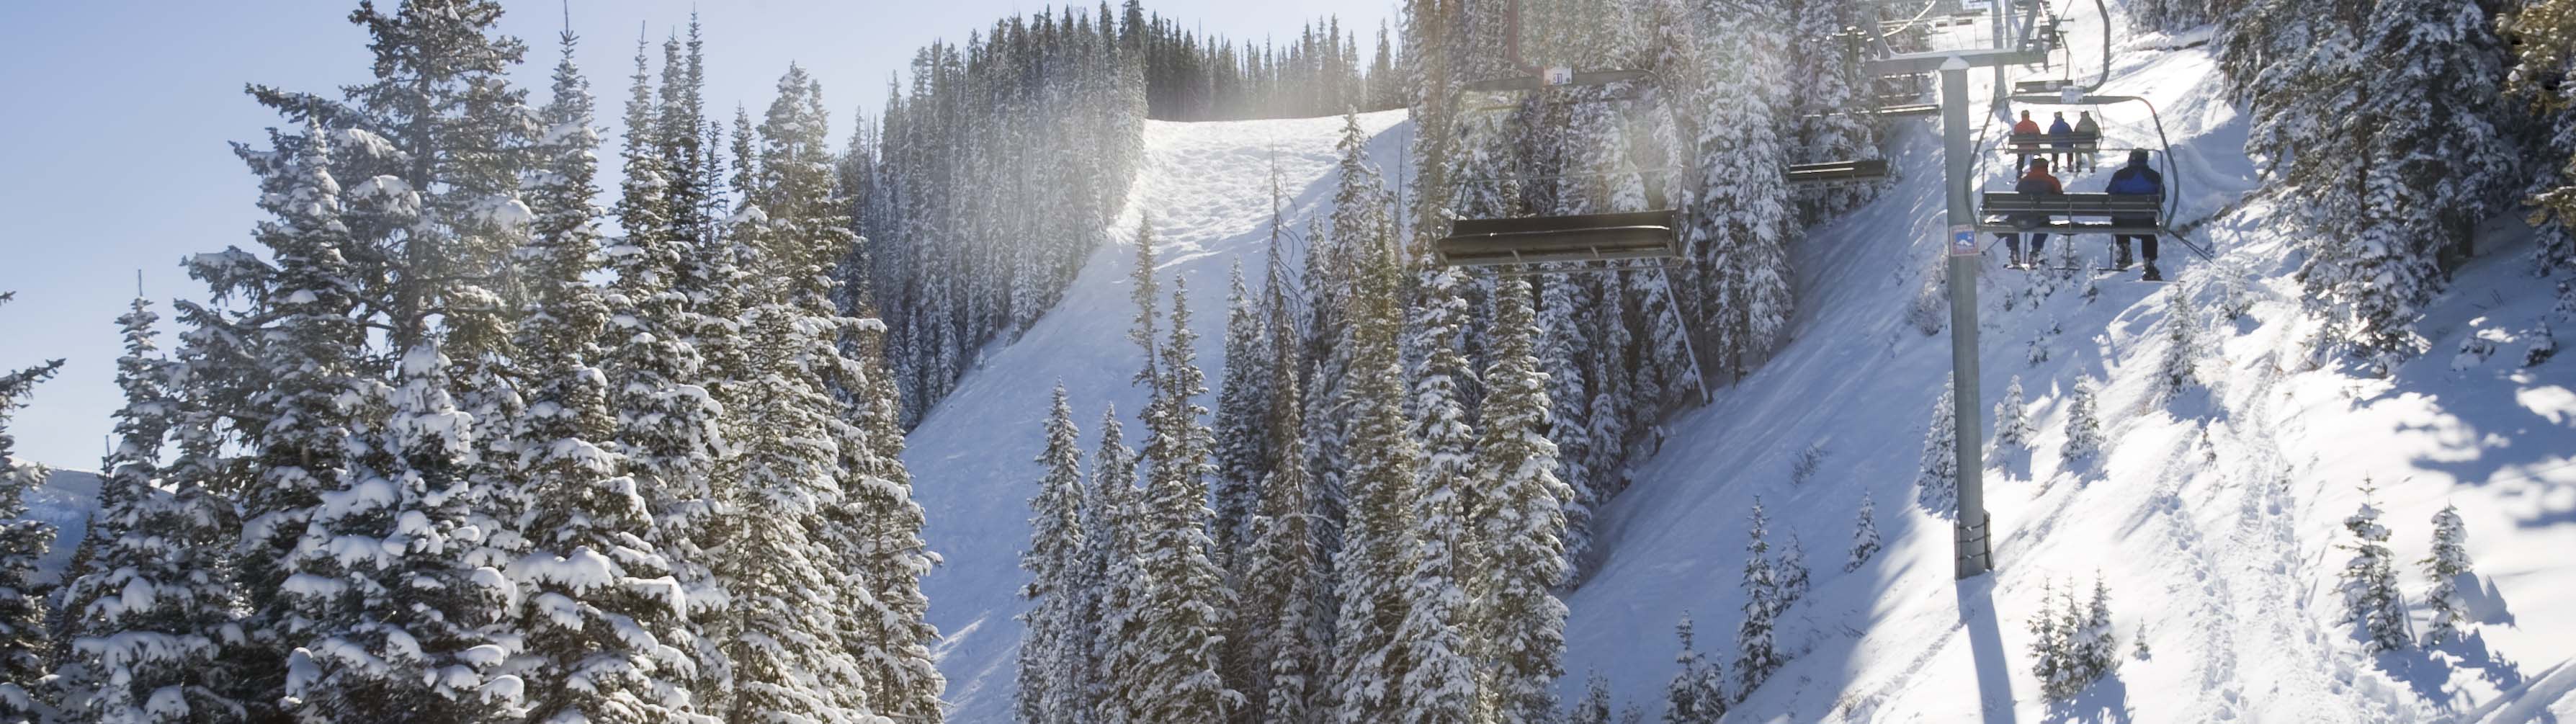 A ski lift takes guests up to the snowy summit in Aspen.